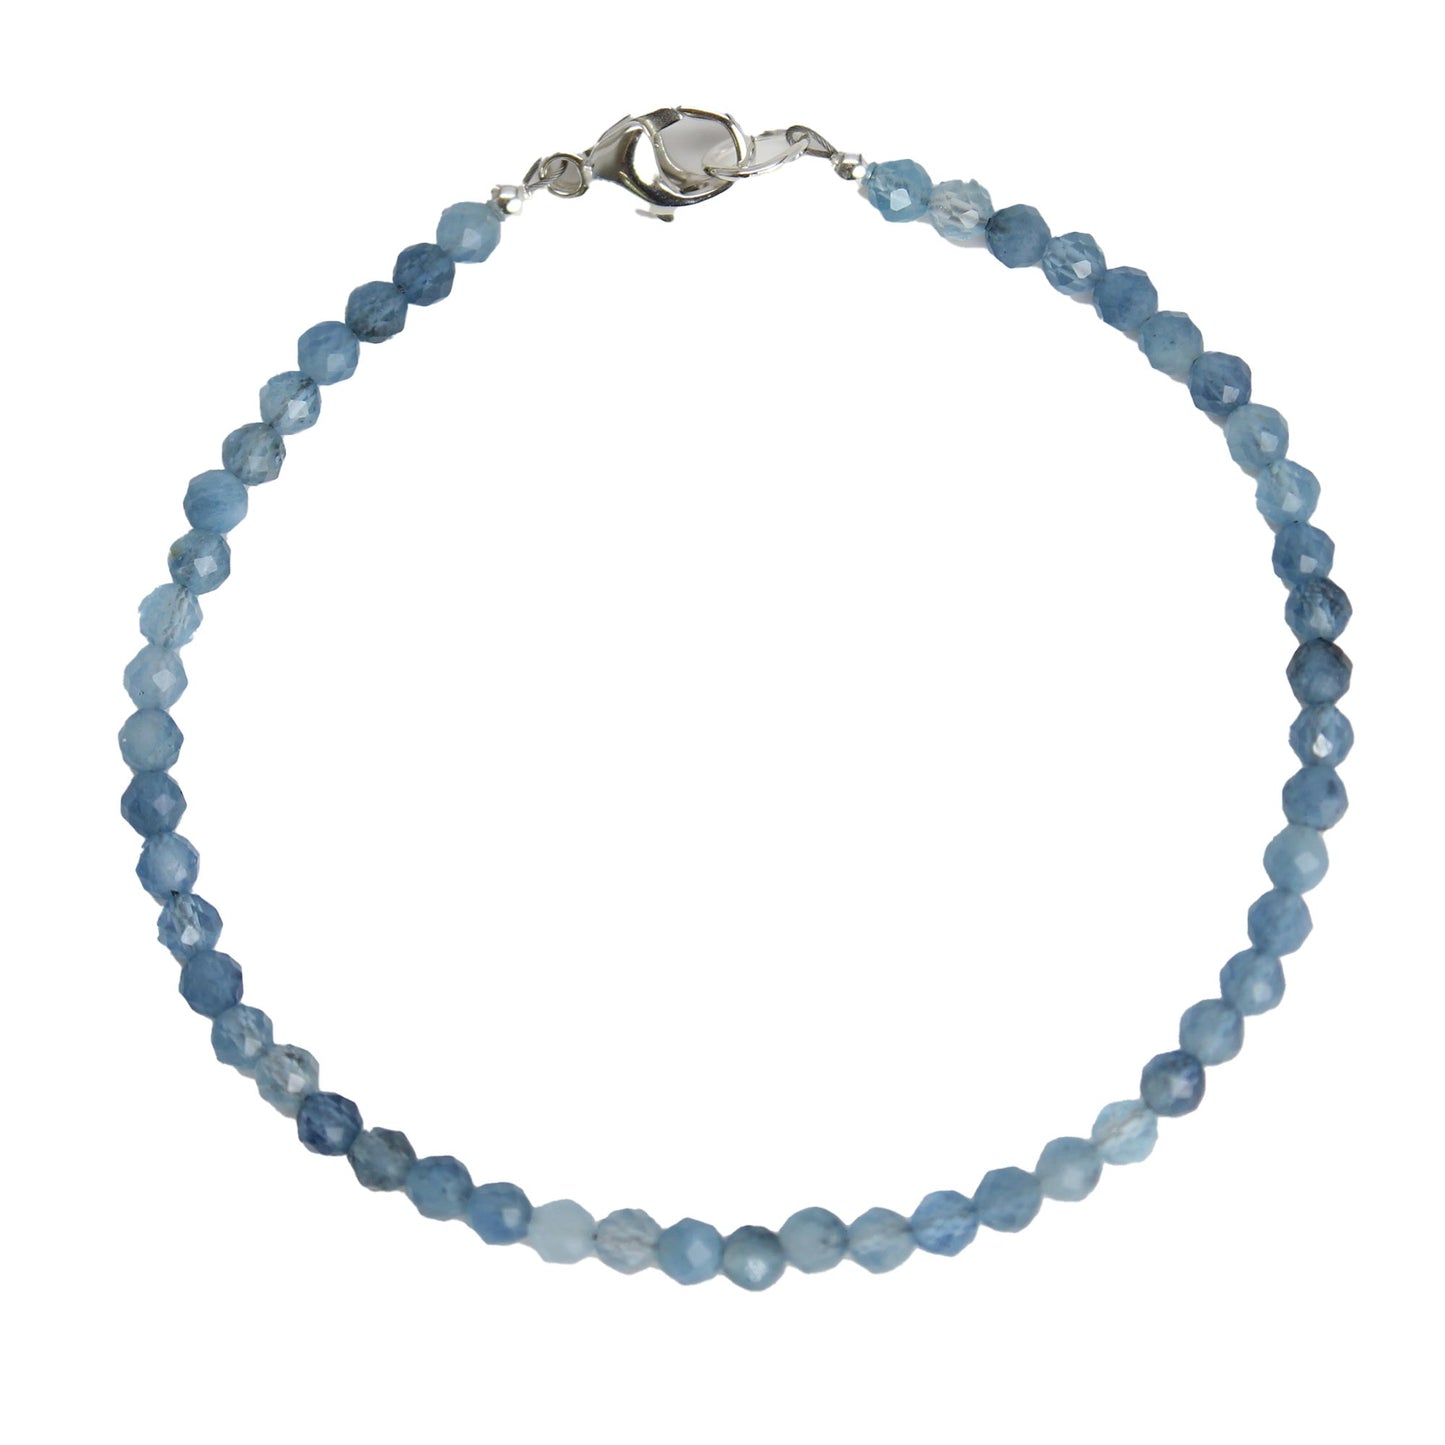 3mm Faceted Aquamarine Bracelet with Sterling Silver or Gold Filled Clasp